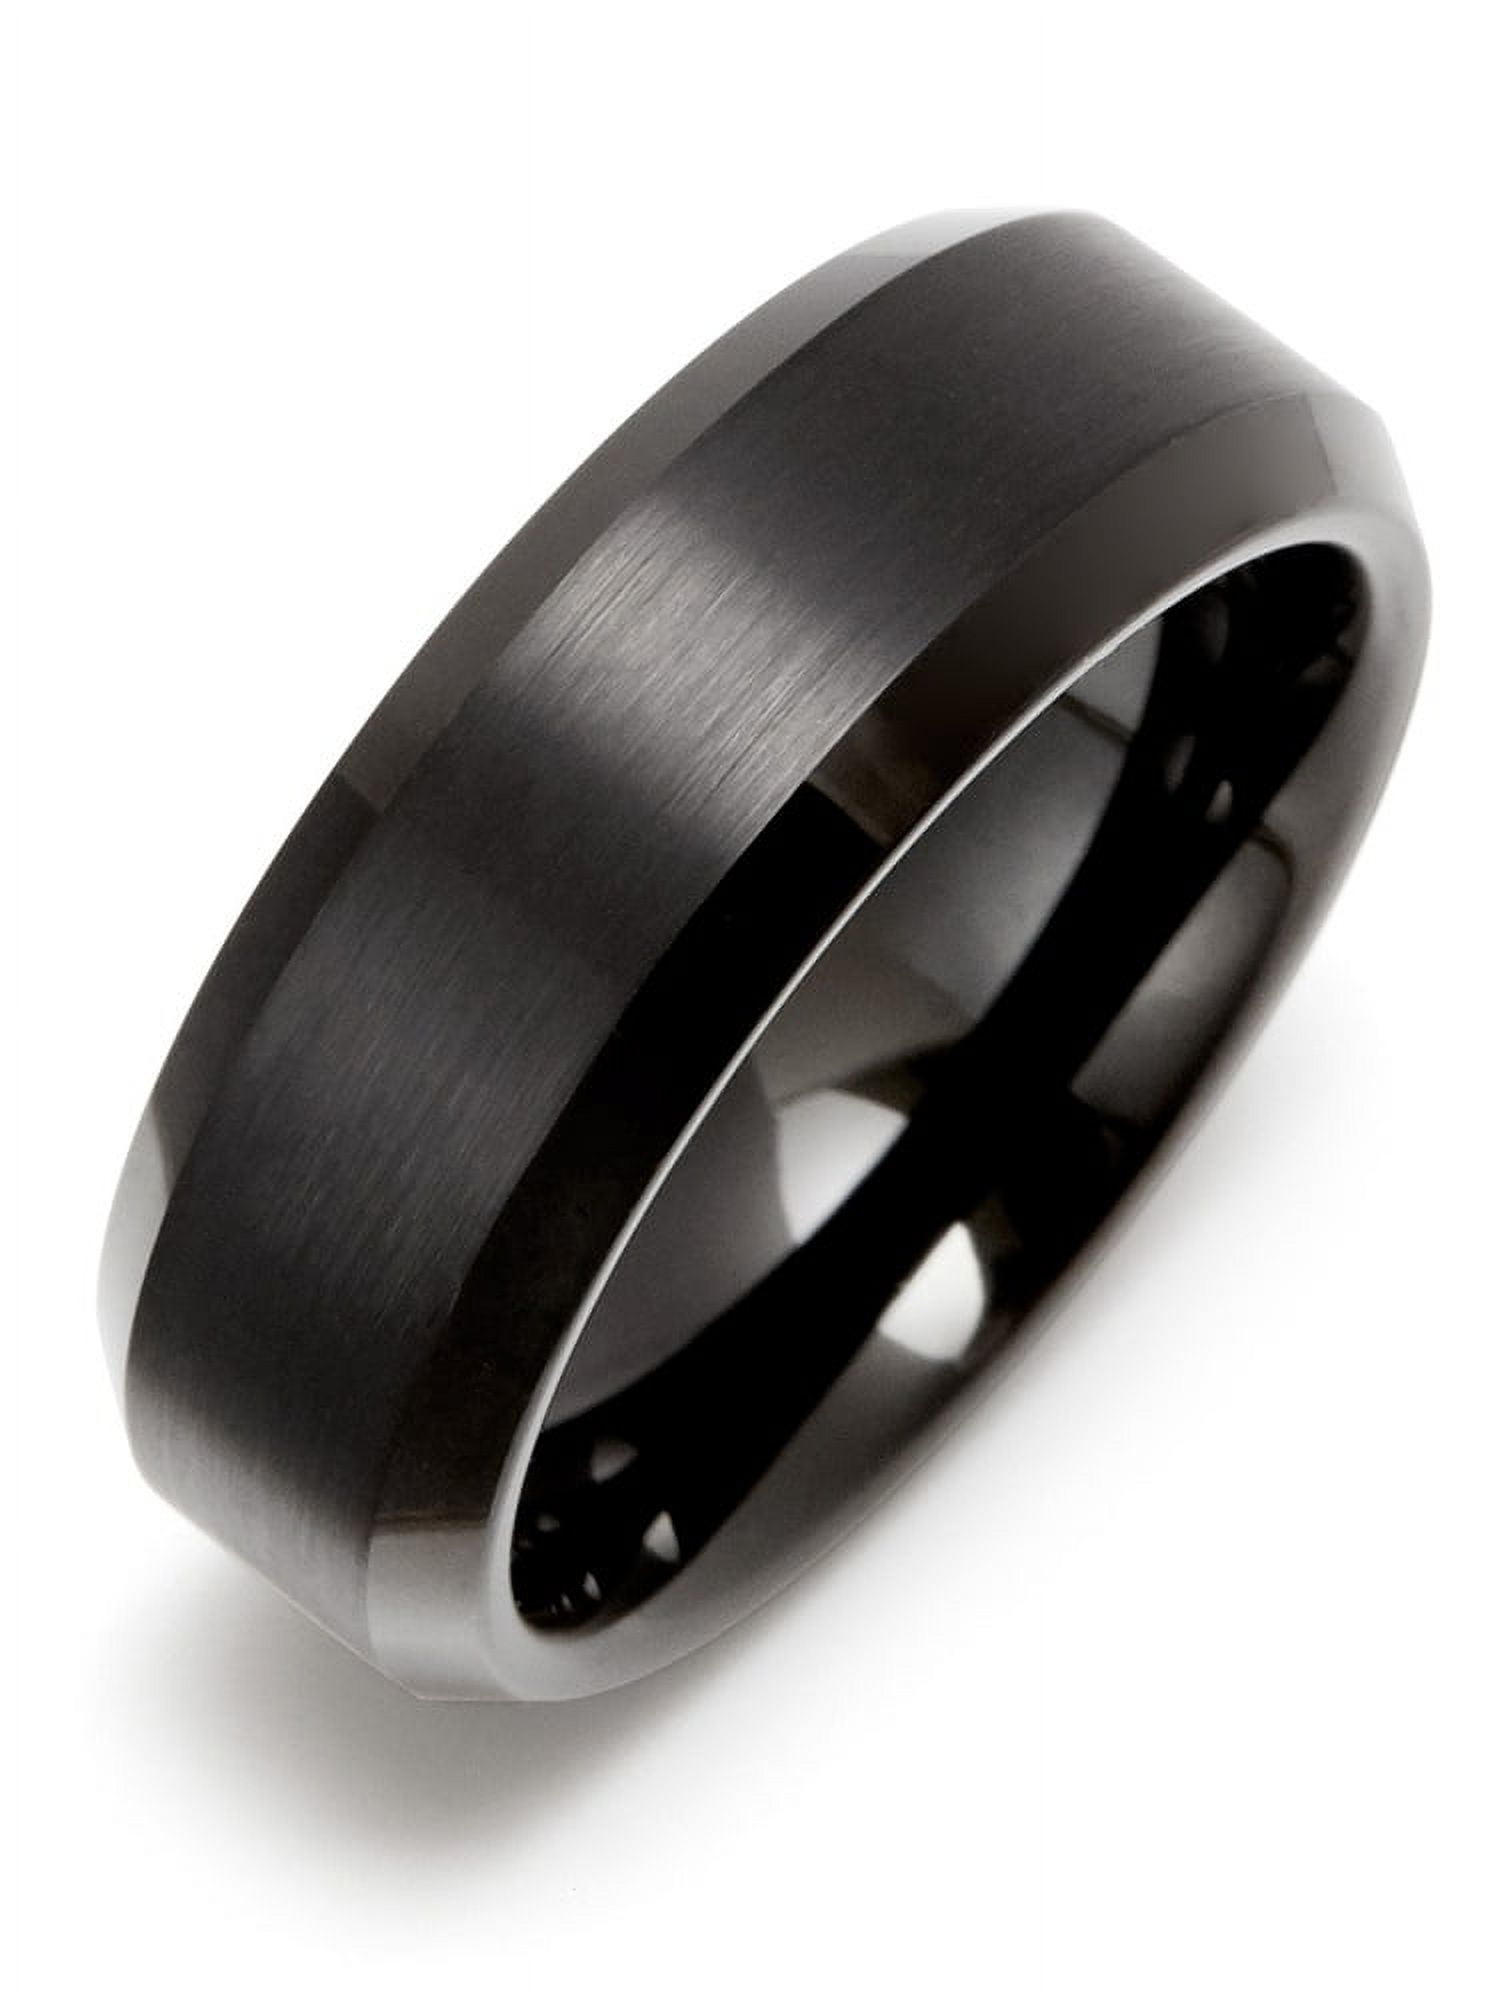 Rinfit Wedding Ring Protector for Working Out - Silicone Rubber